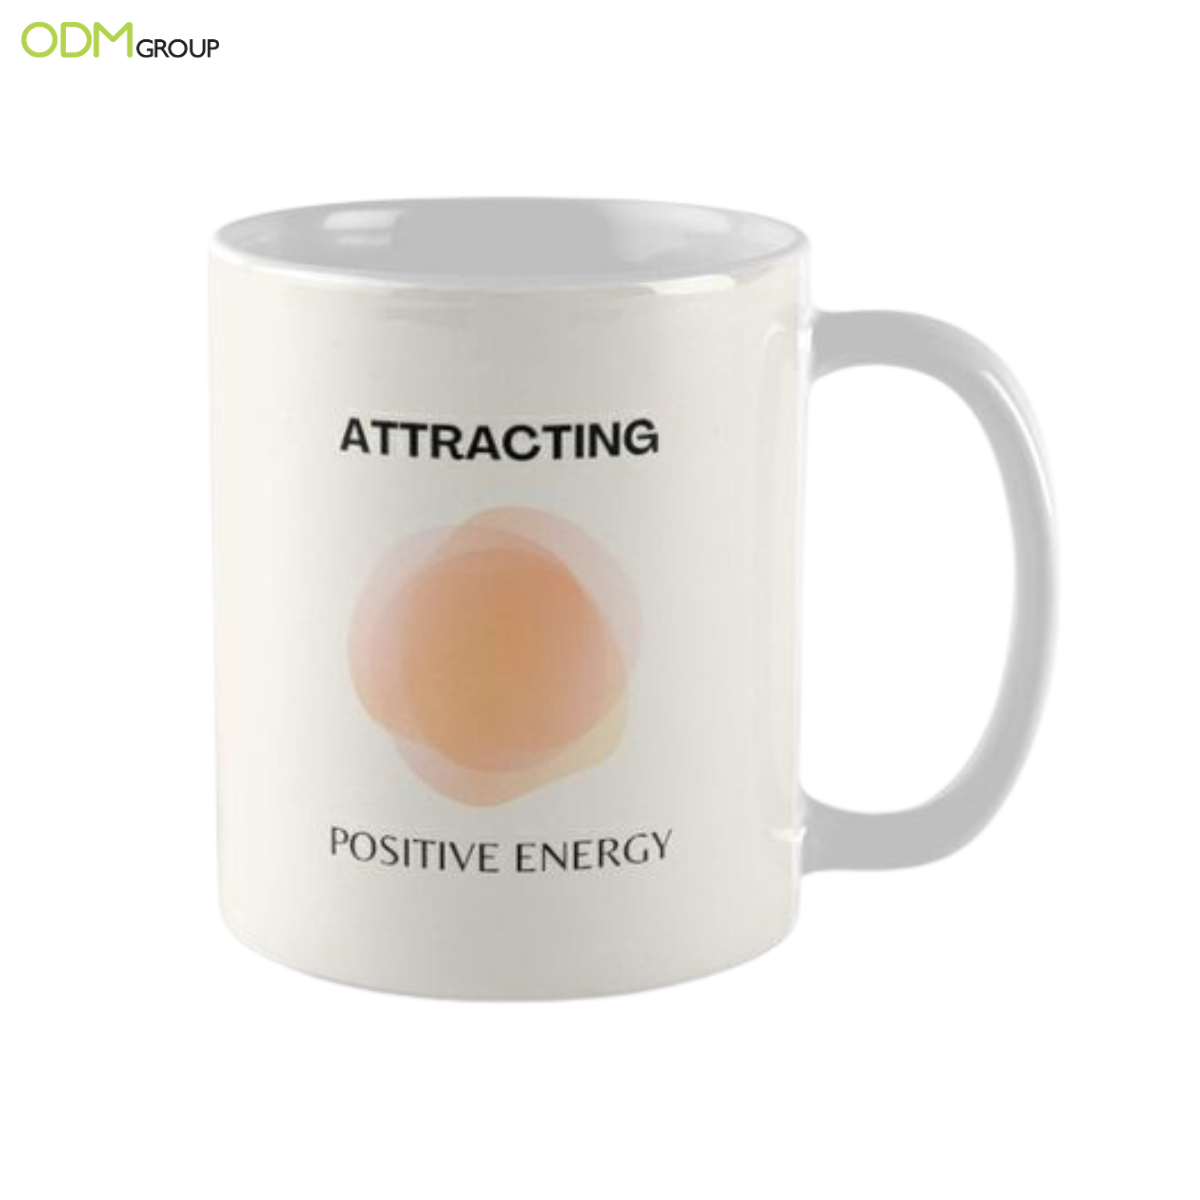 White mug with the words "Attracting Positive Energy" printed on it.